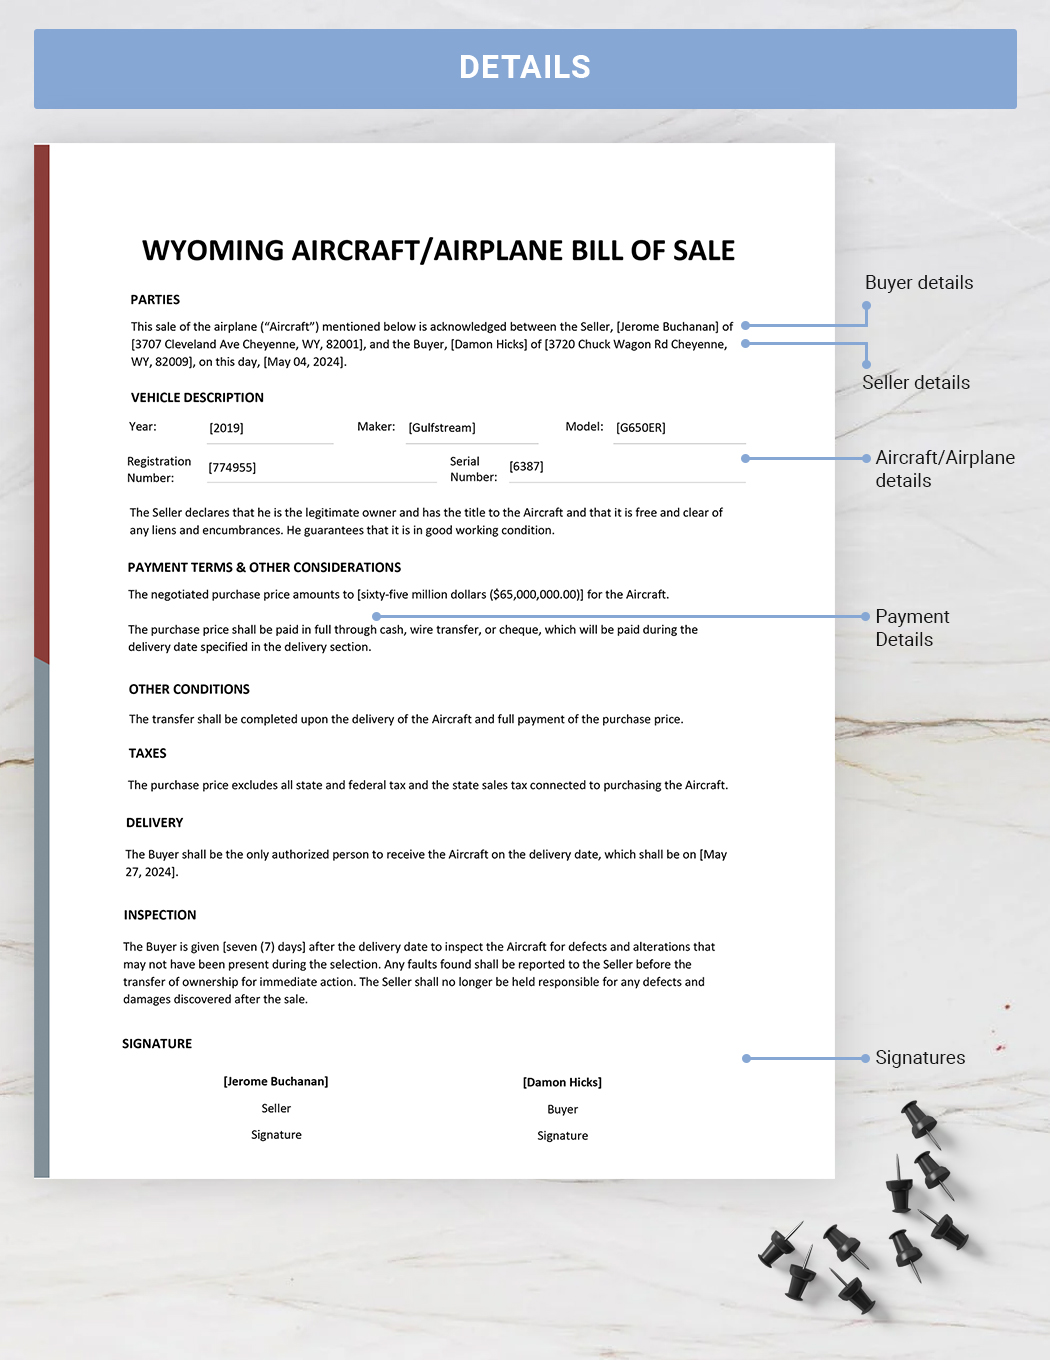 Wyoming Aircraft / Airplane Bill of Sale Template